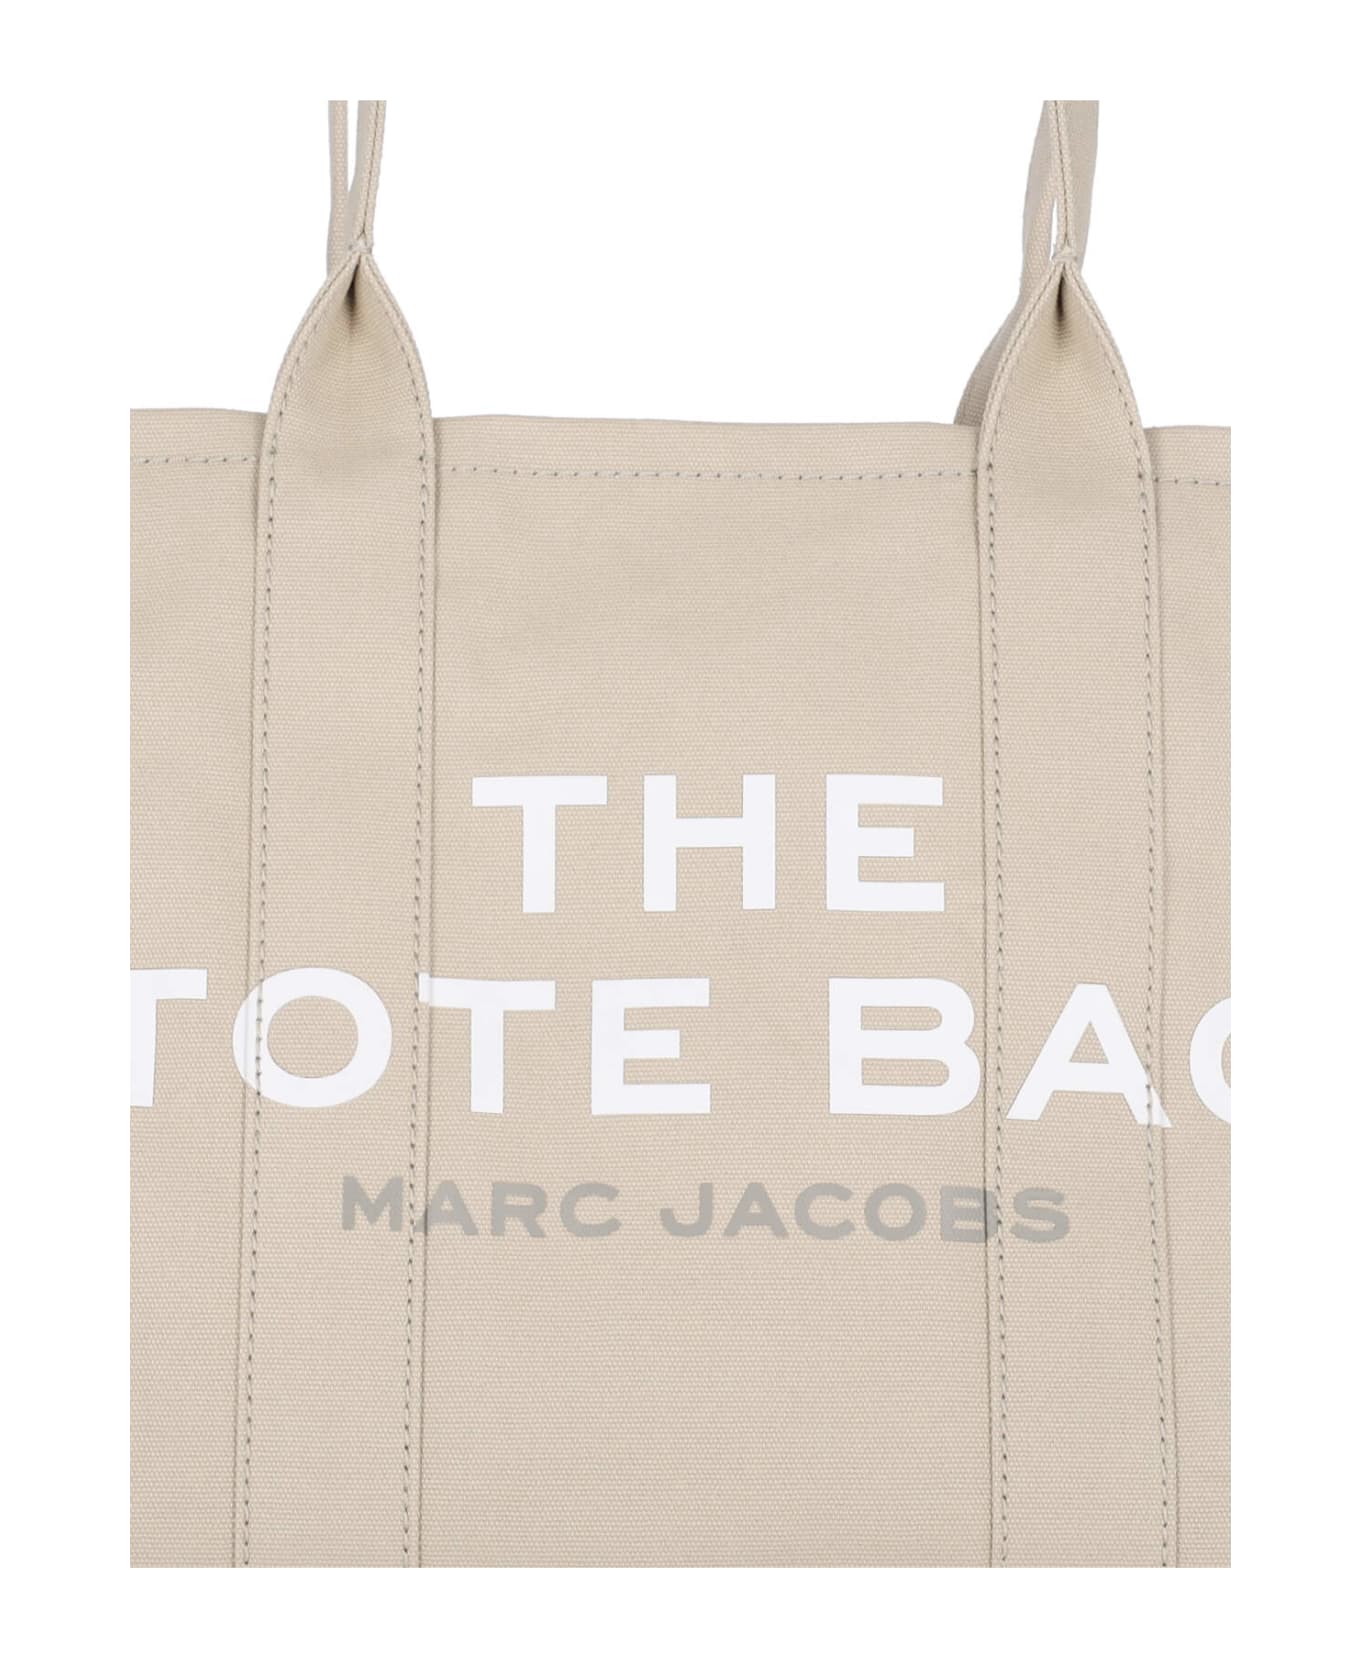 Marc Jacobs 'the Large Tote' Bag - Beige